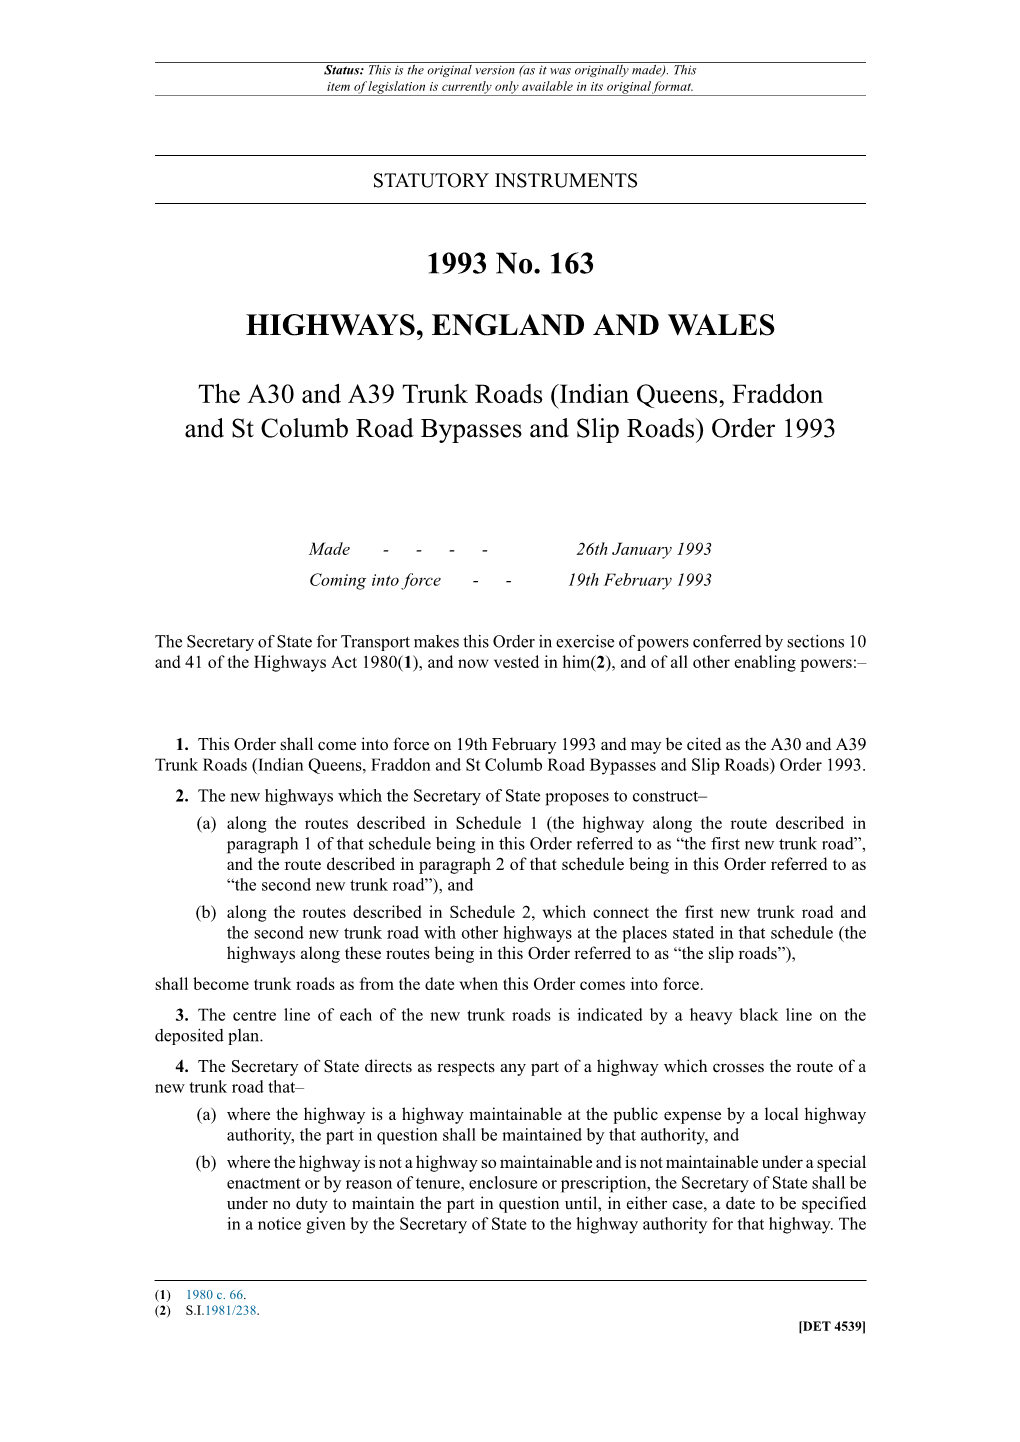 The A30 and A39 Trunk Roads (Indian Queens, Fraddon and St Columb Road Bypasses and Slip Roads) Order 1993